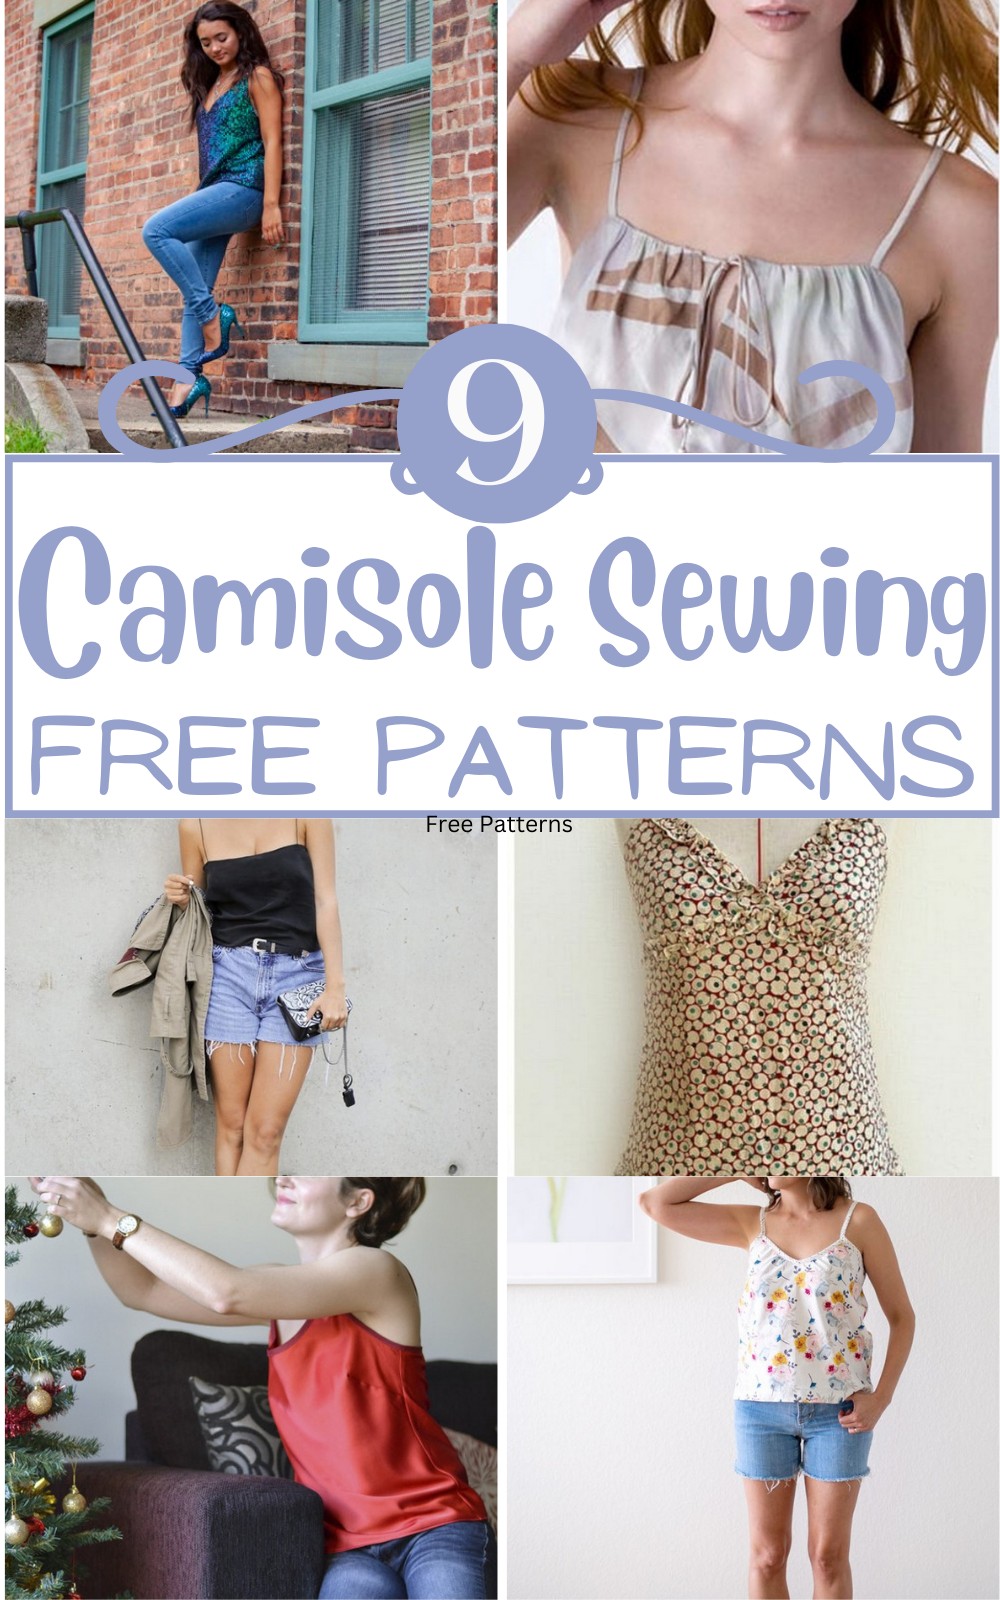 Free Camisole Sewing Patterns 1